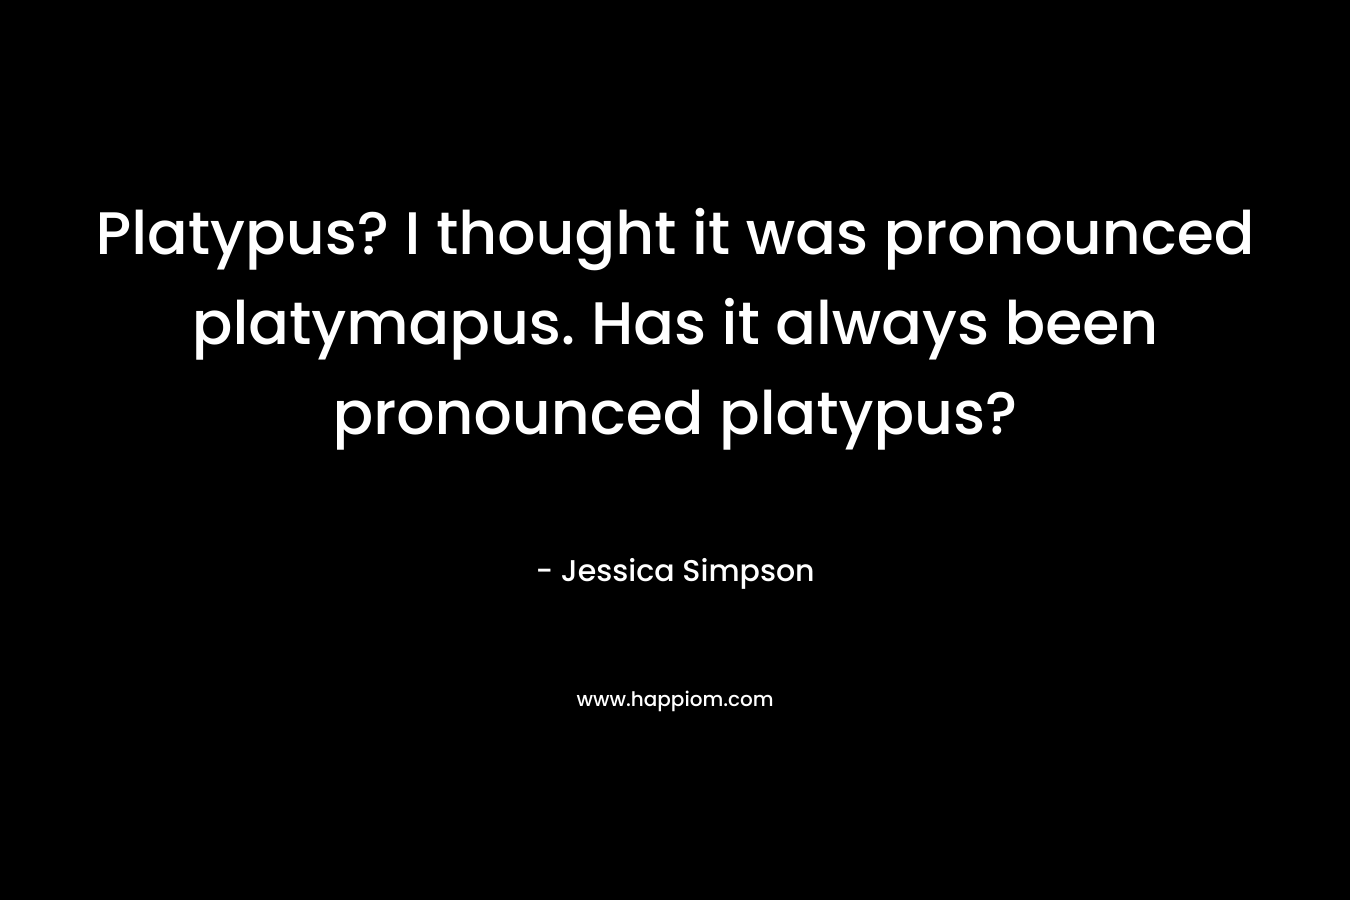 Platypus? I thought it was pronounced platymapus. Has it always been pronounced platypus? – Jessica Simpson